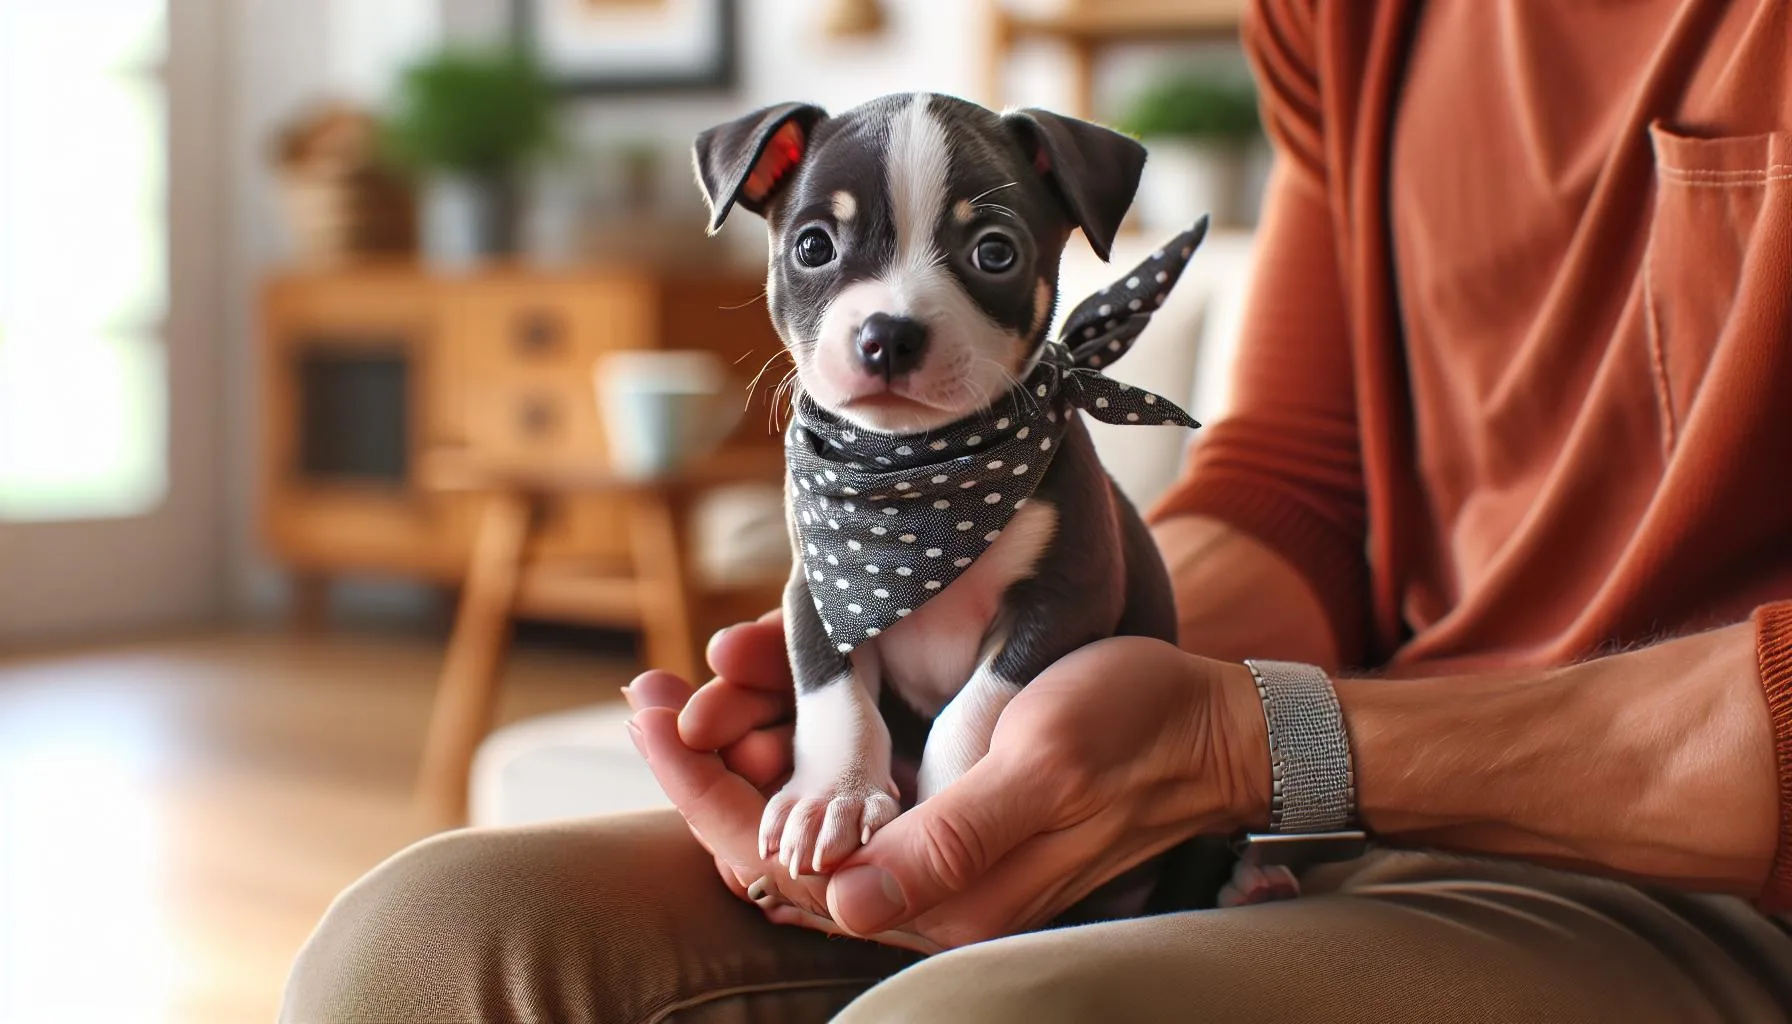 Chihuahua Mix with a Pitbull: Adopt Love!